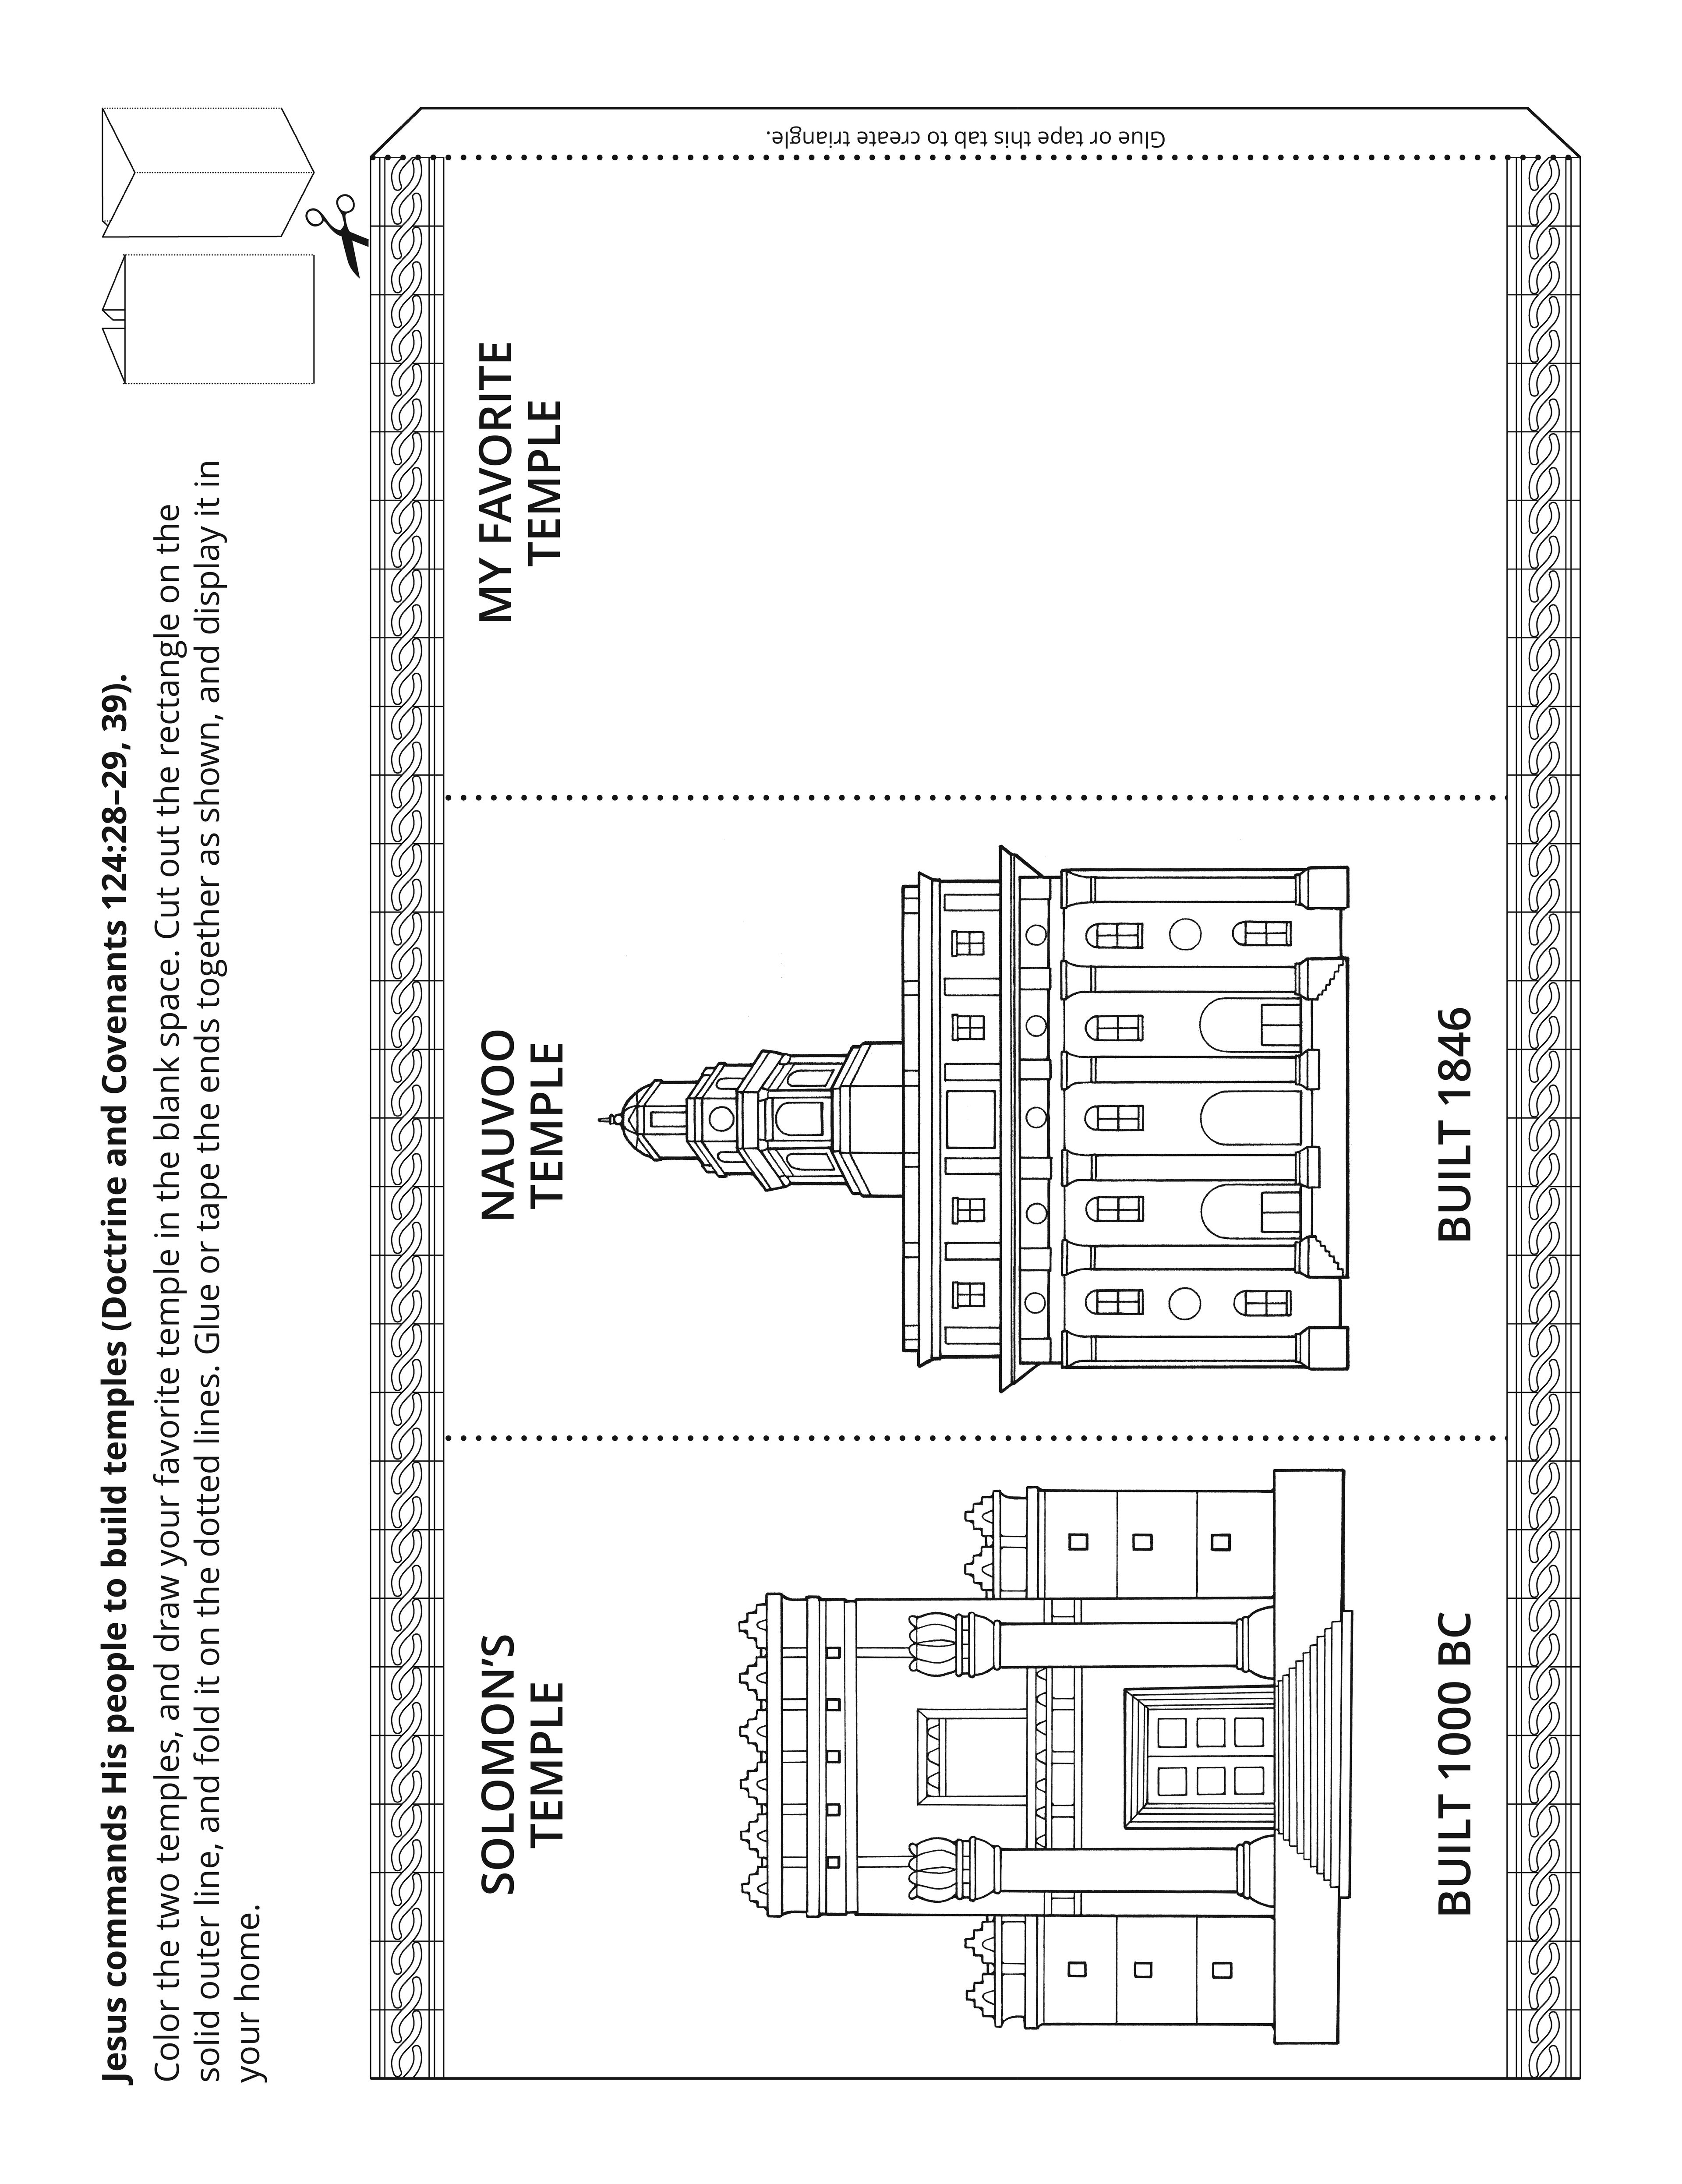 Line drawing activity depicts temples. © undefined ipCode 1.